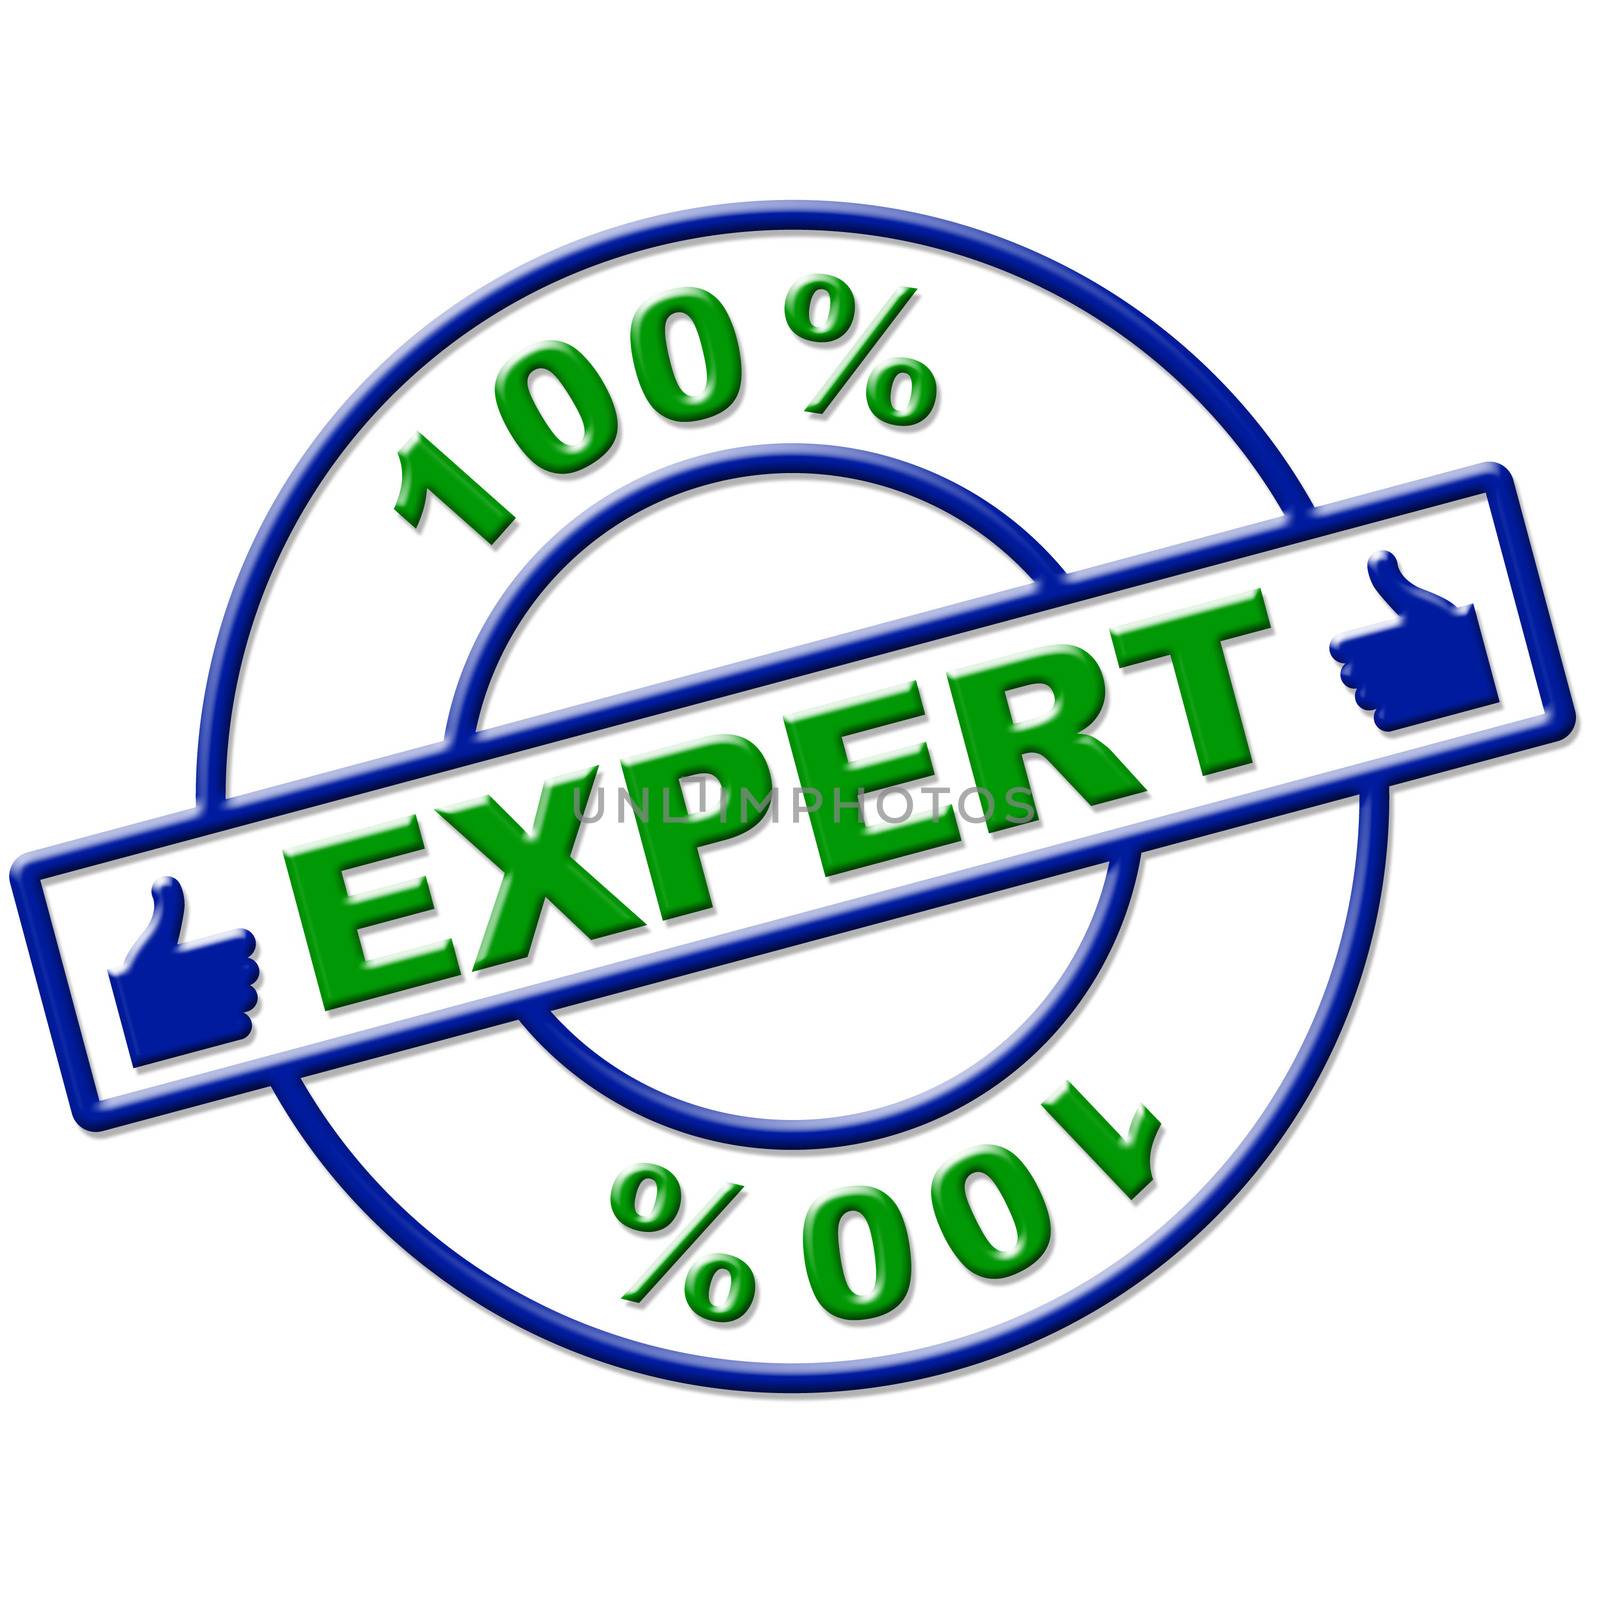 Hundred Percent Expert Means Excellence Completely And Skills by stuartmiles